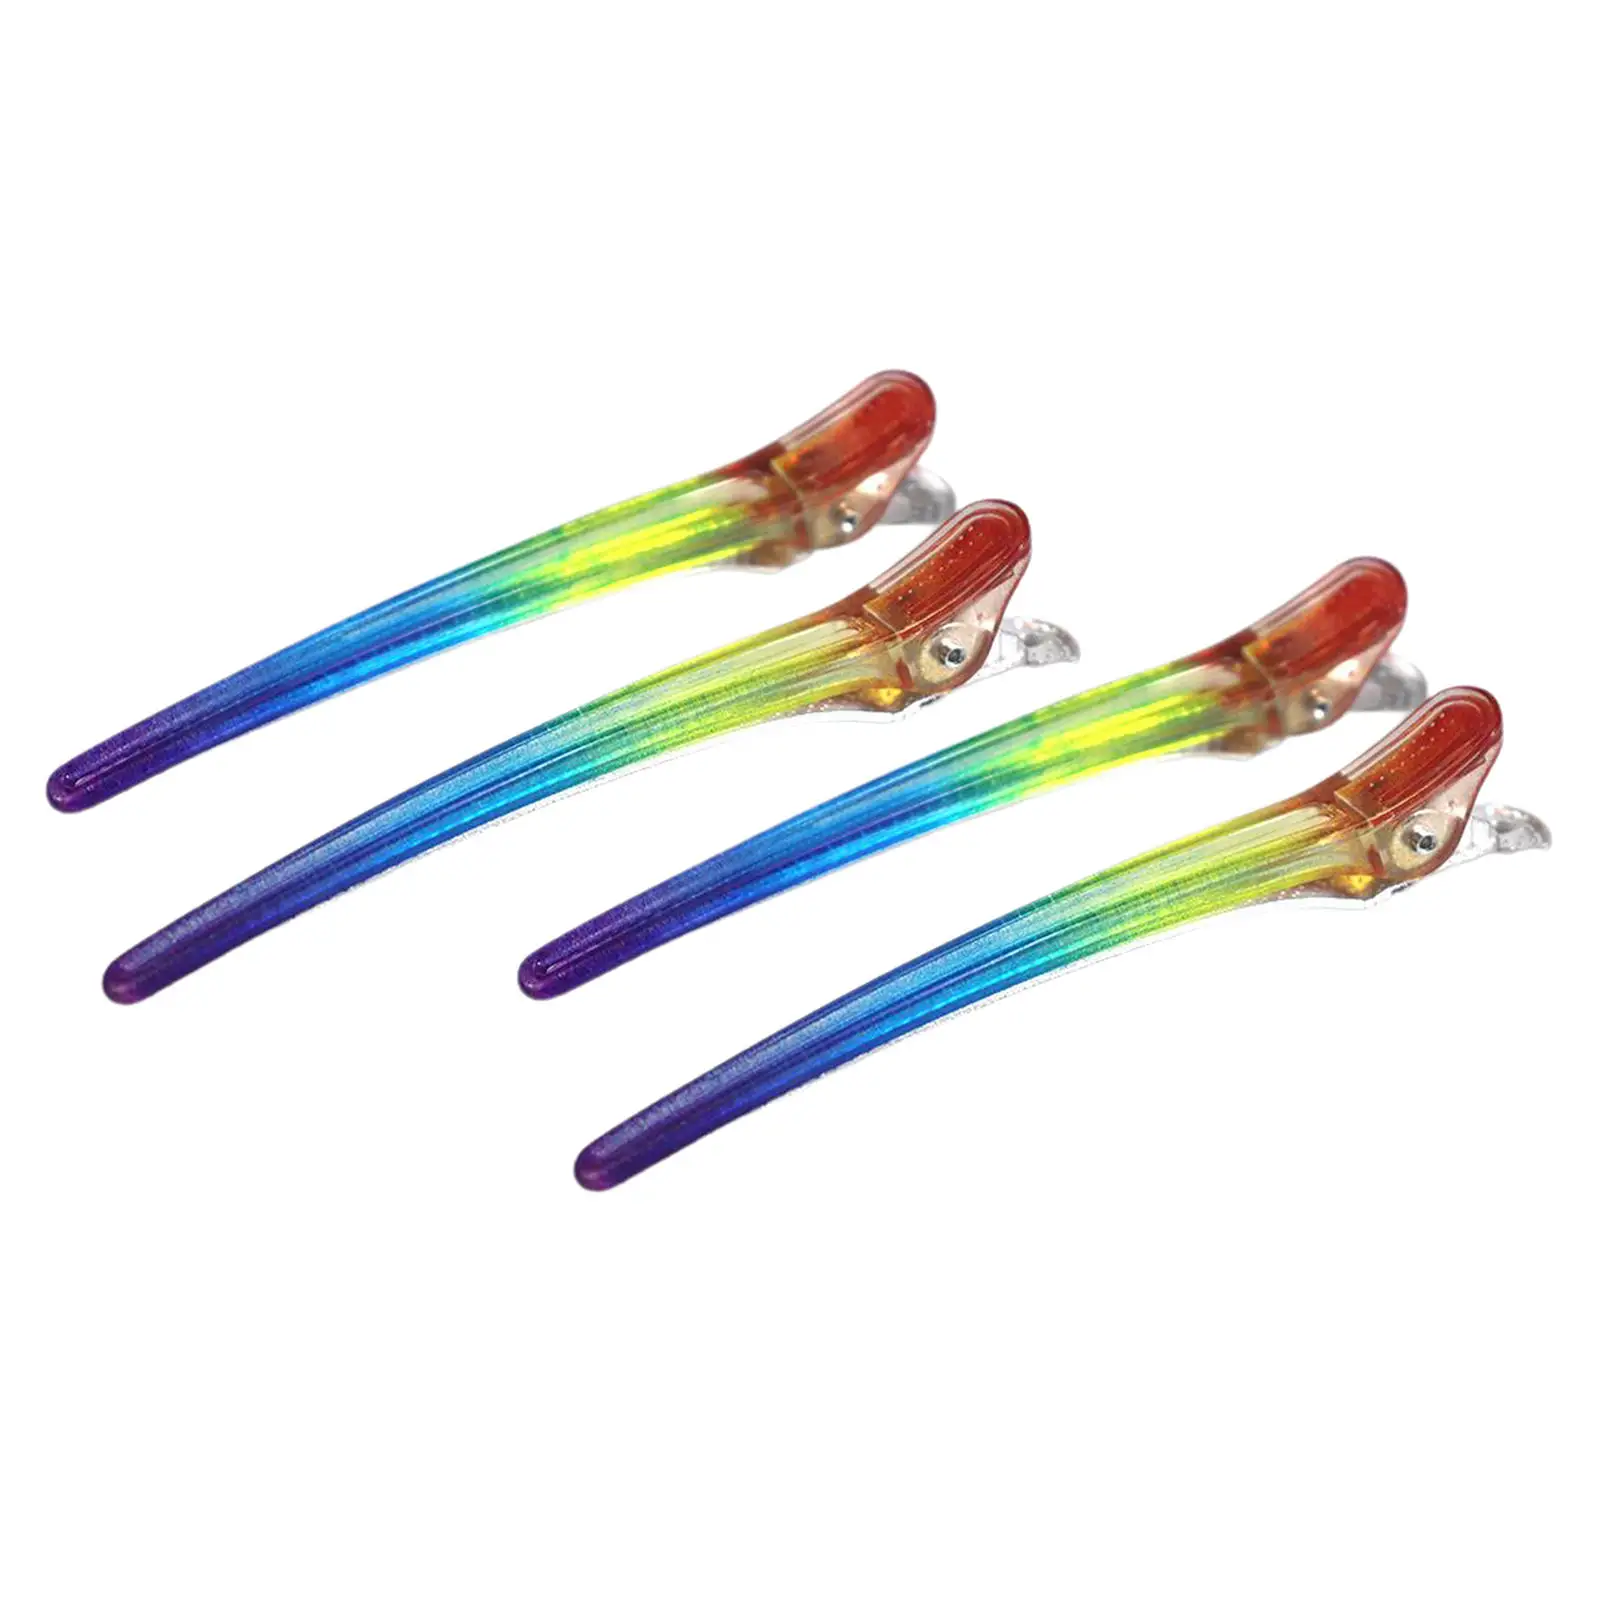 4 Pcs Dividing Duck Bill Clips Clamp. Hair Styling Clips. Hairpin Hairdressing Sectioning For Salon Styling Tools Rainbow